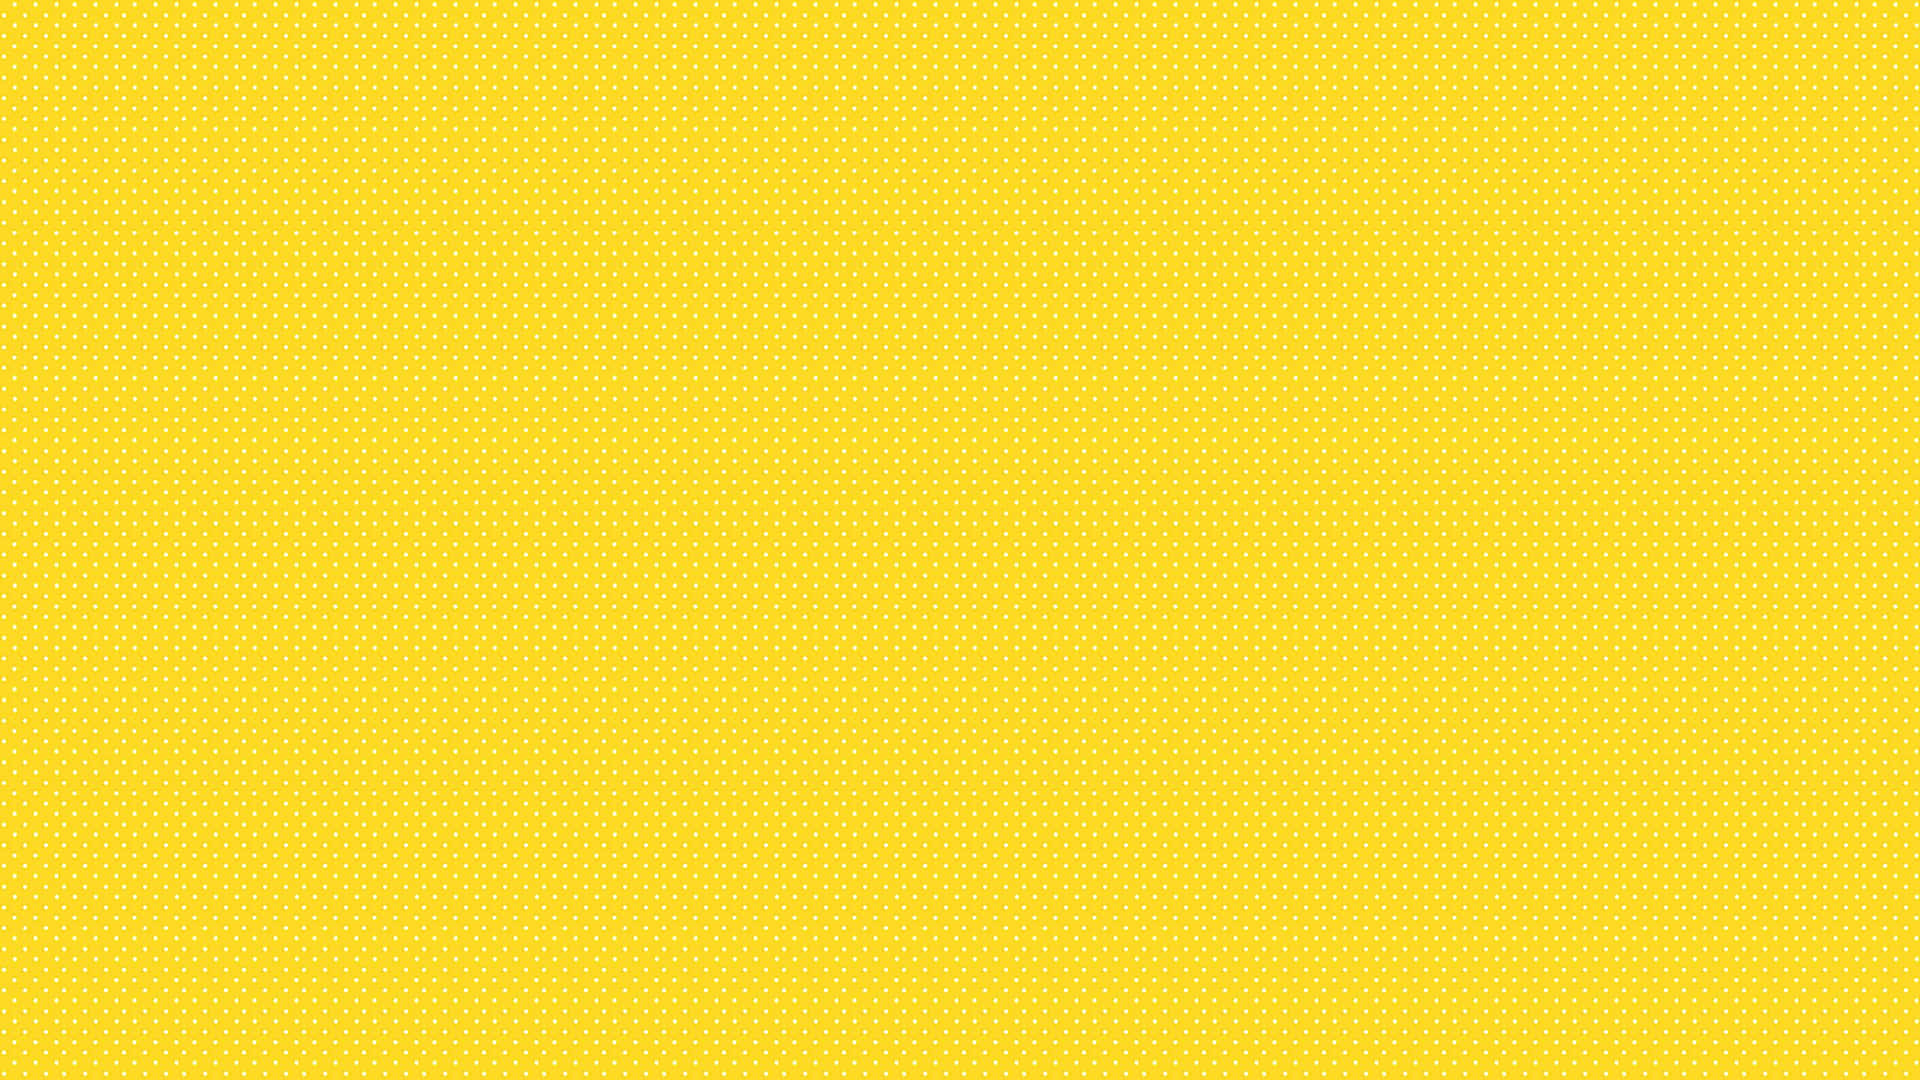 100+] Solid Yellow Background s 